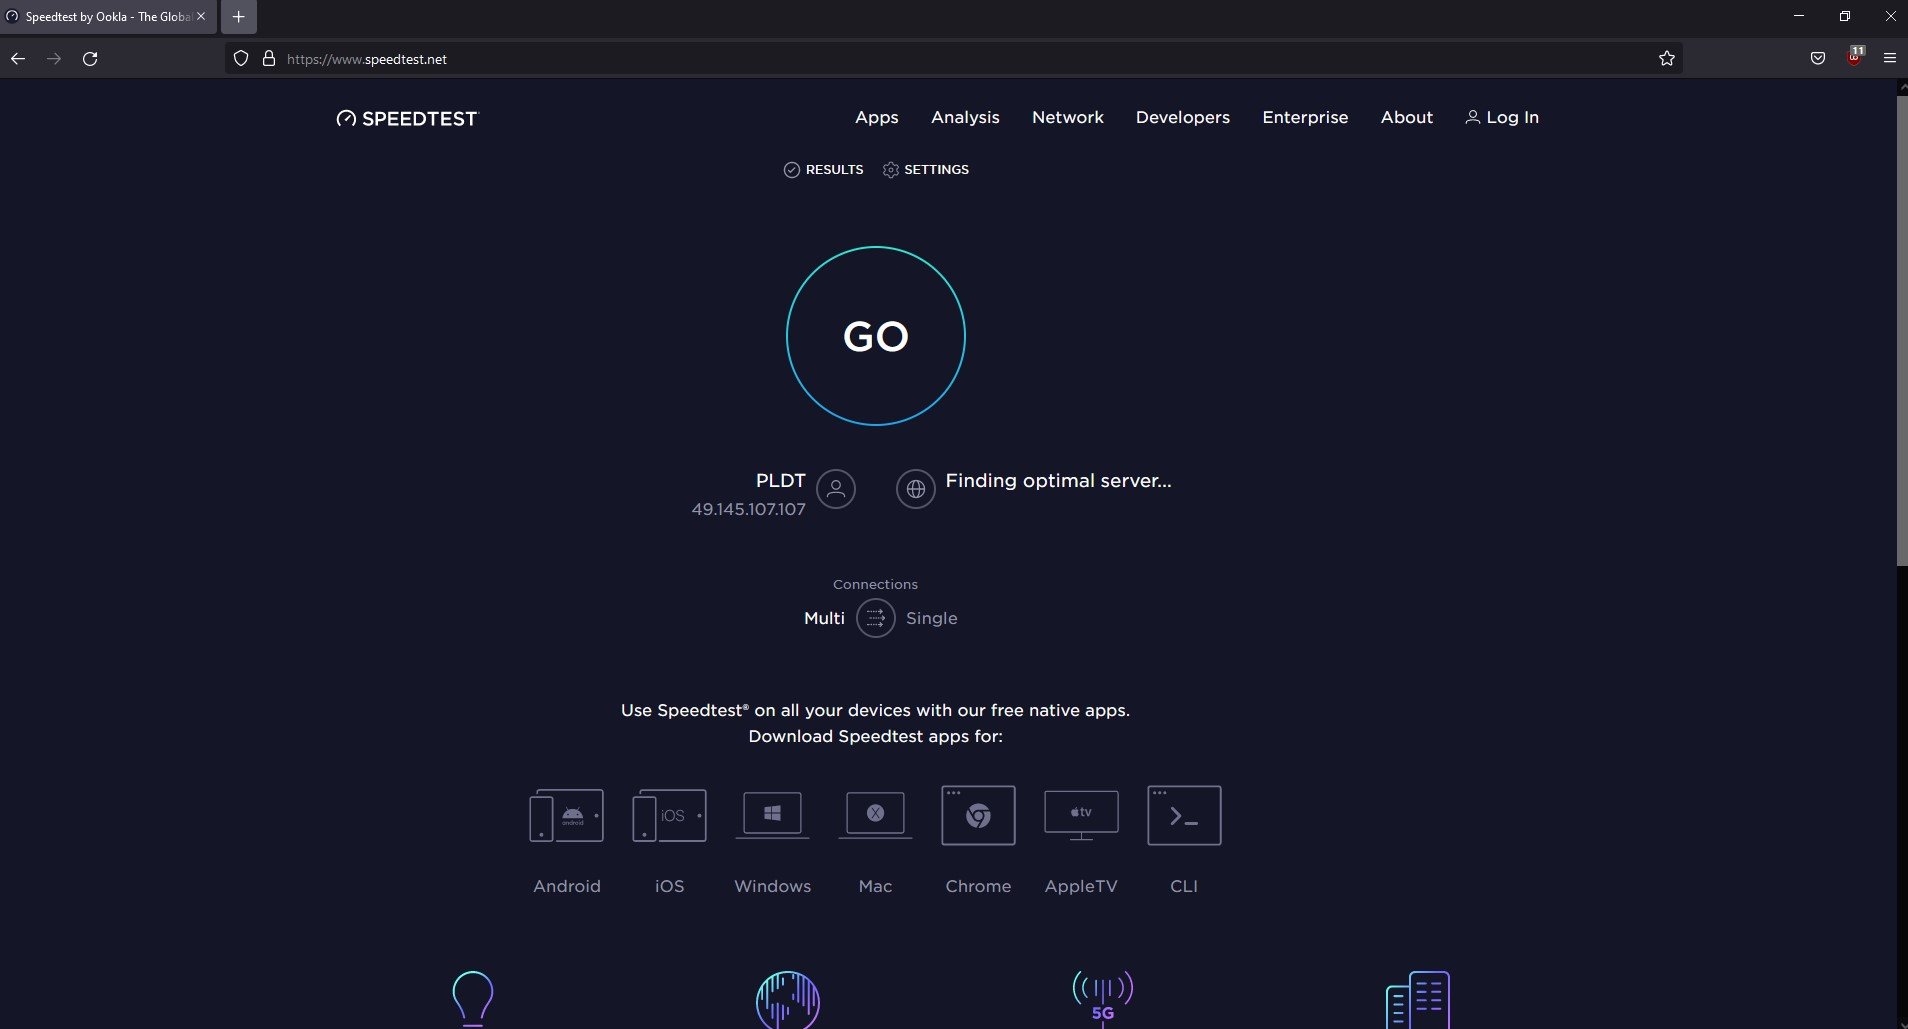 Type speedtest.net to have your internet speed check.